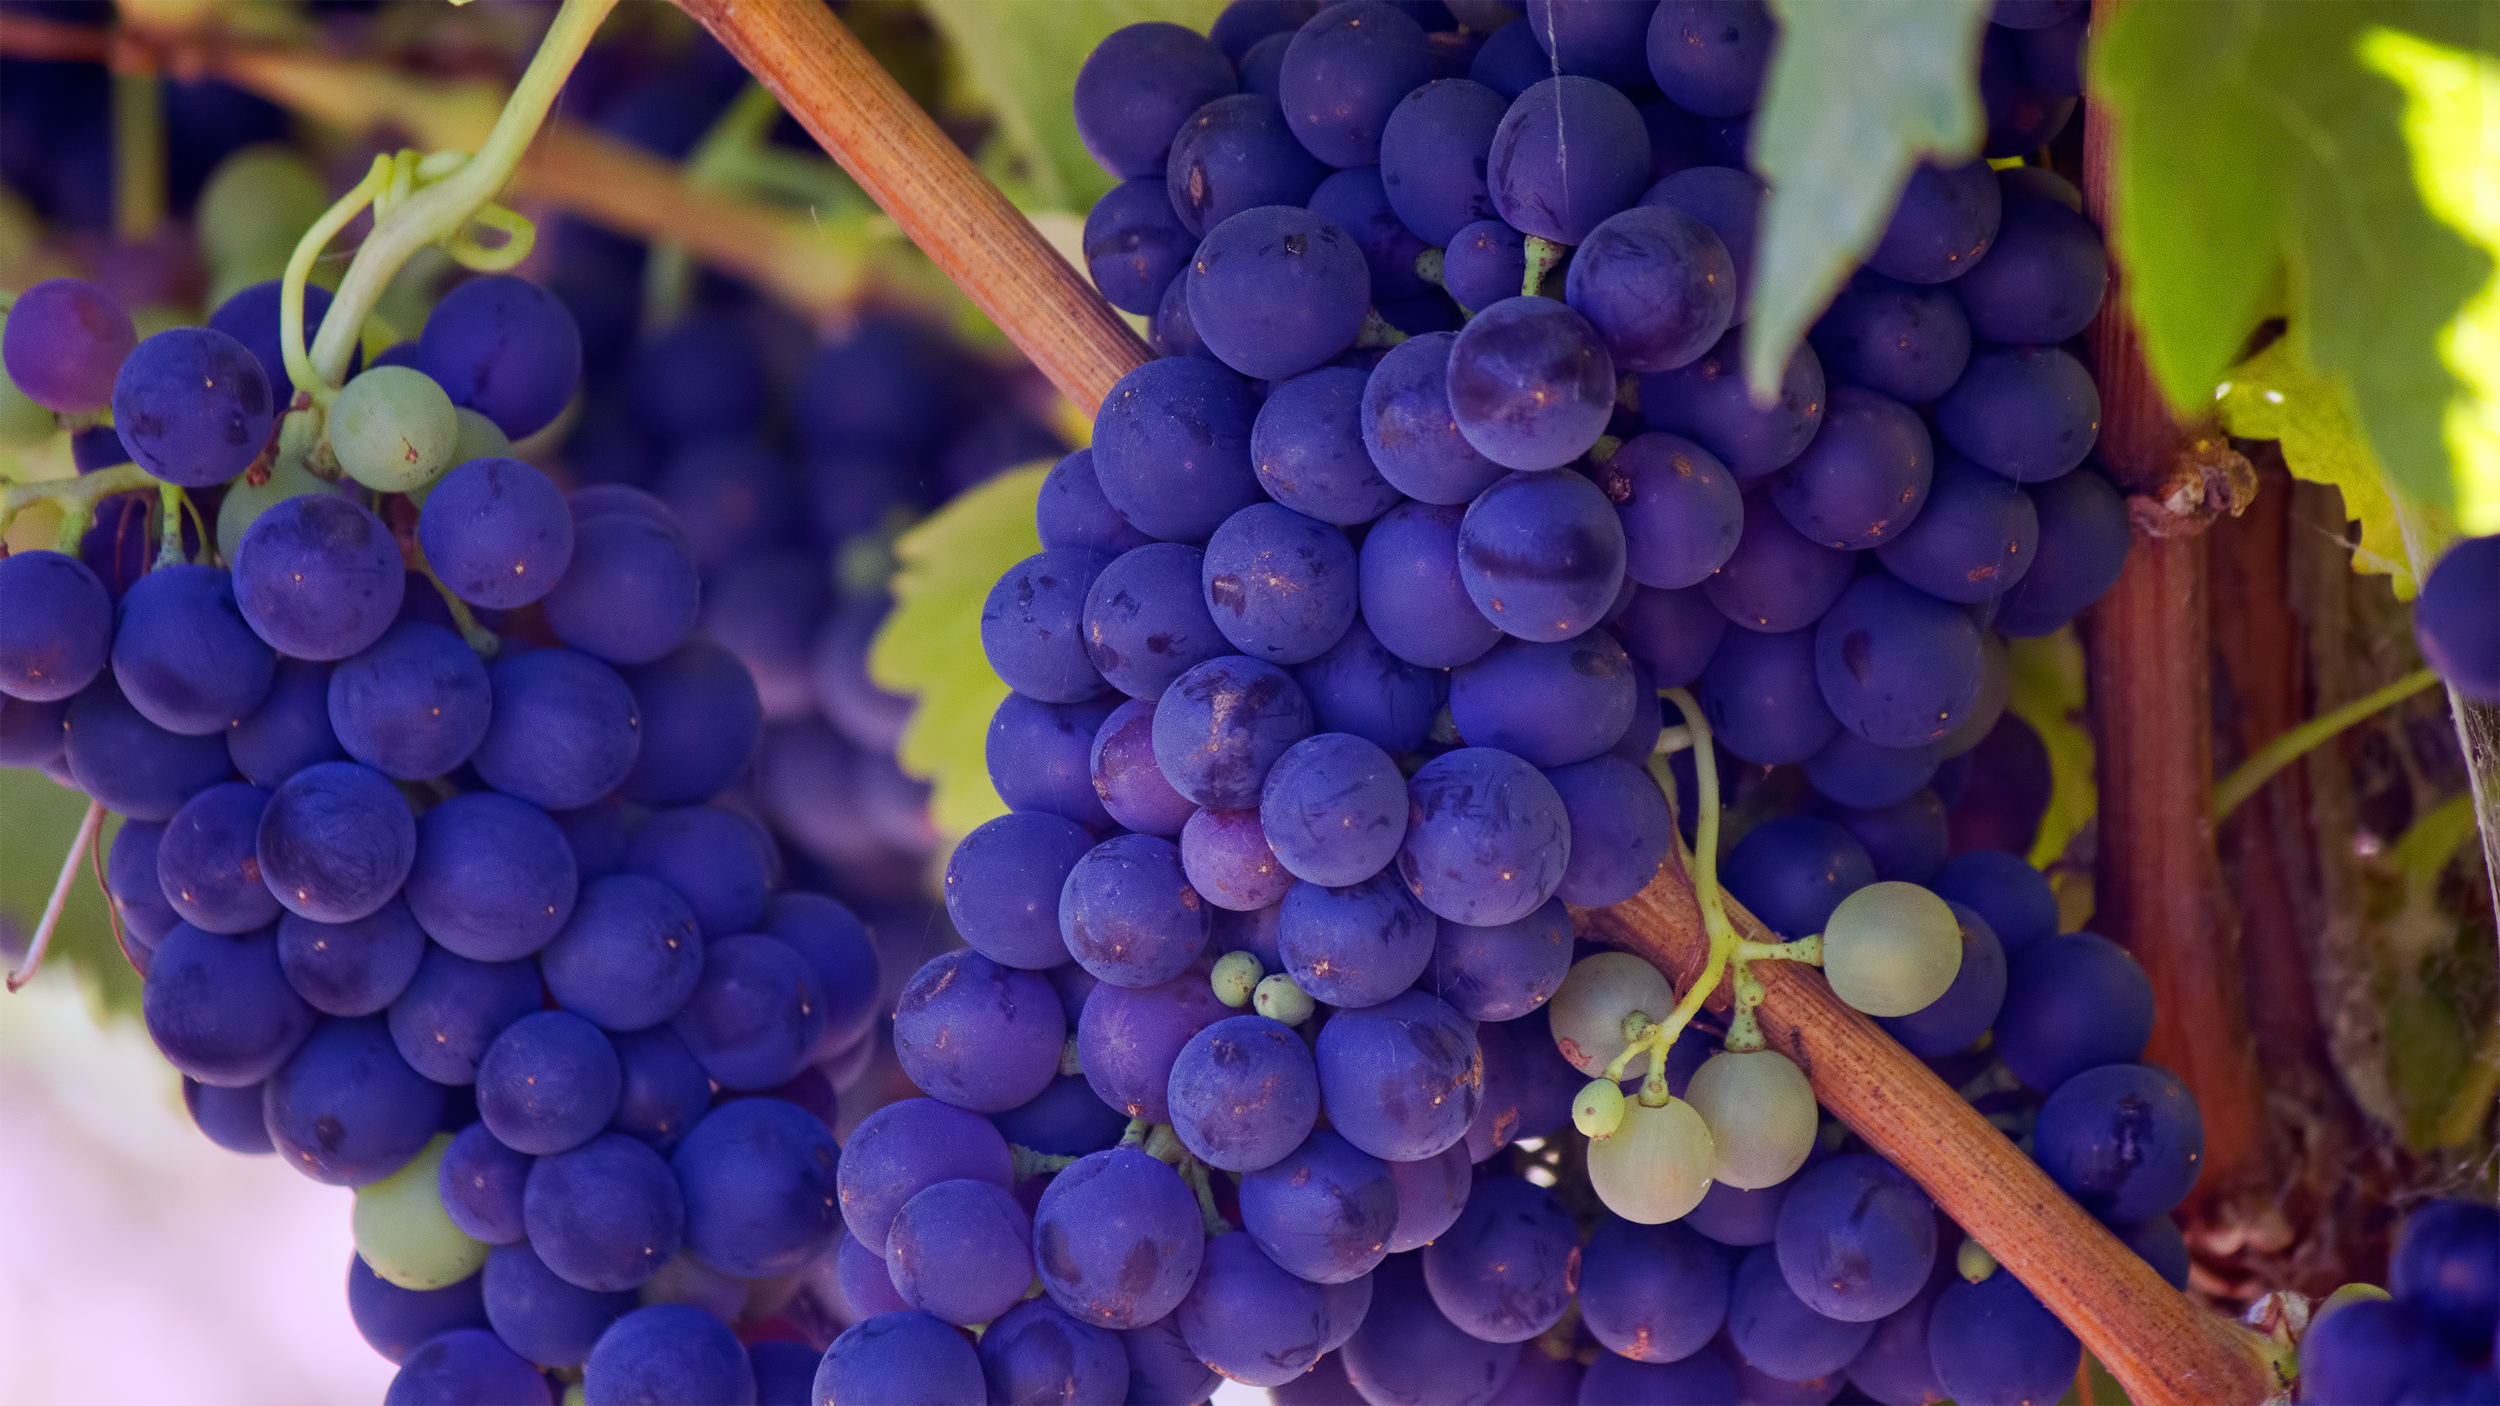 Resveratrol is found in the skin and stems of plants, and famously can be found in trace amounts in red wine due to the stress put on the plants during the winemaking process.